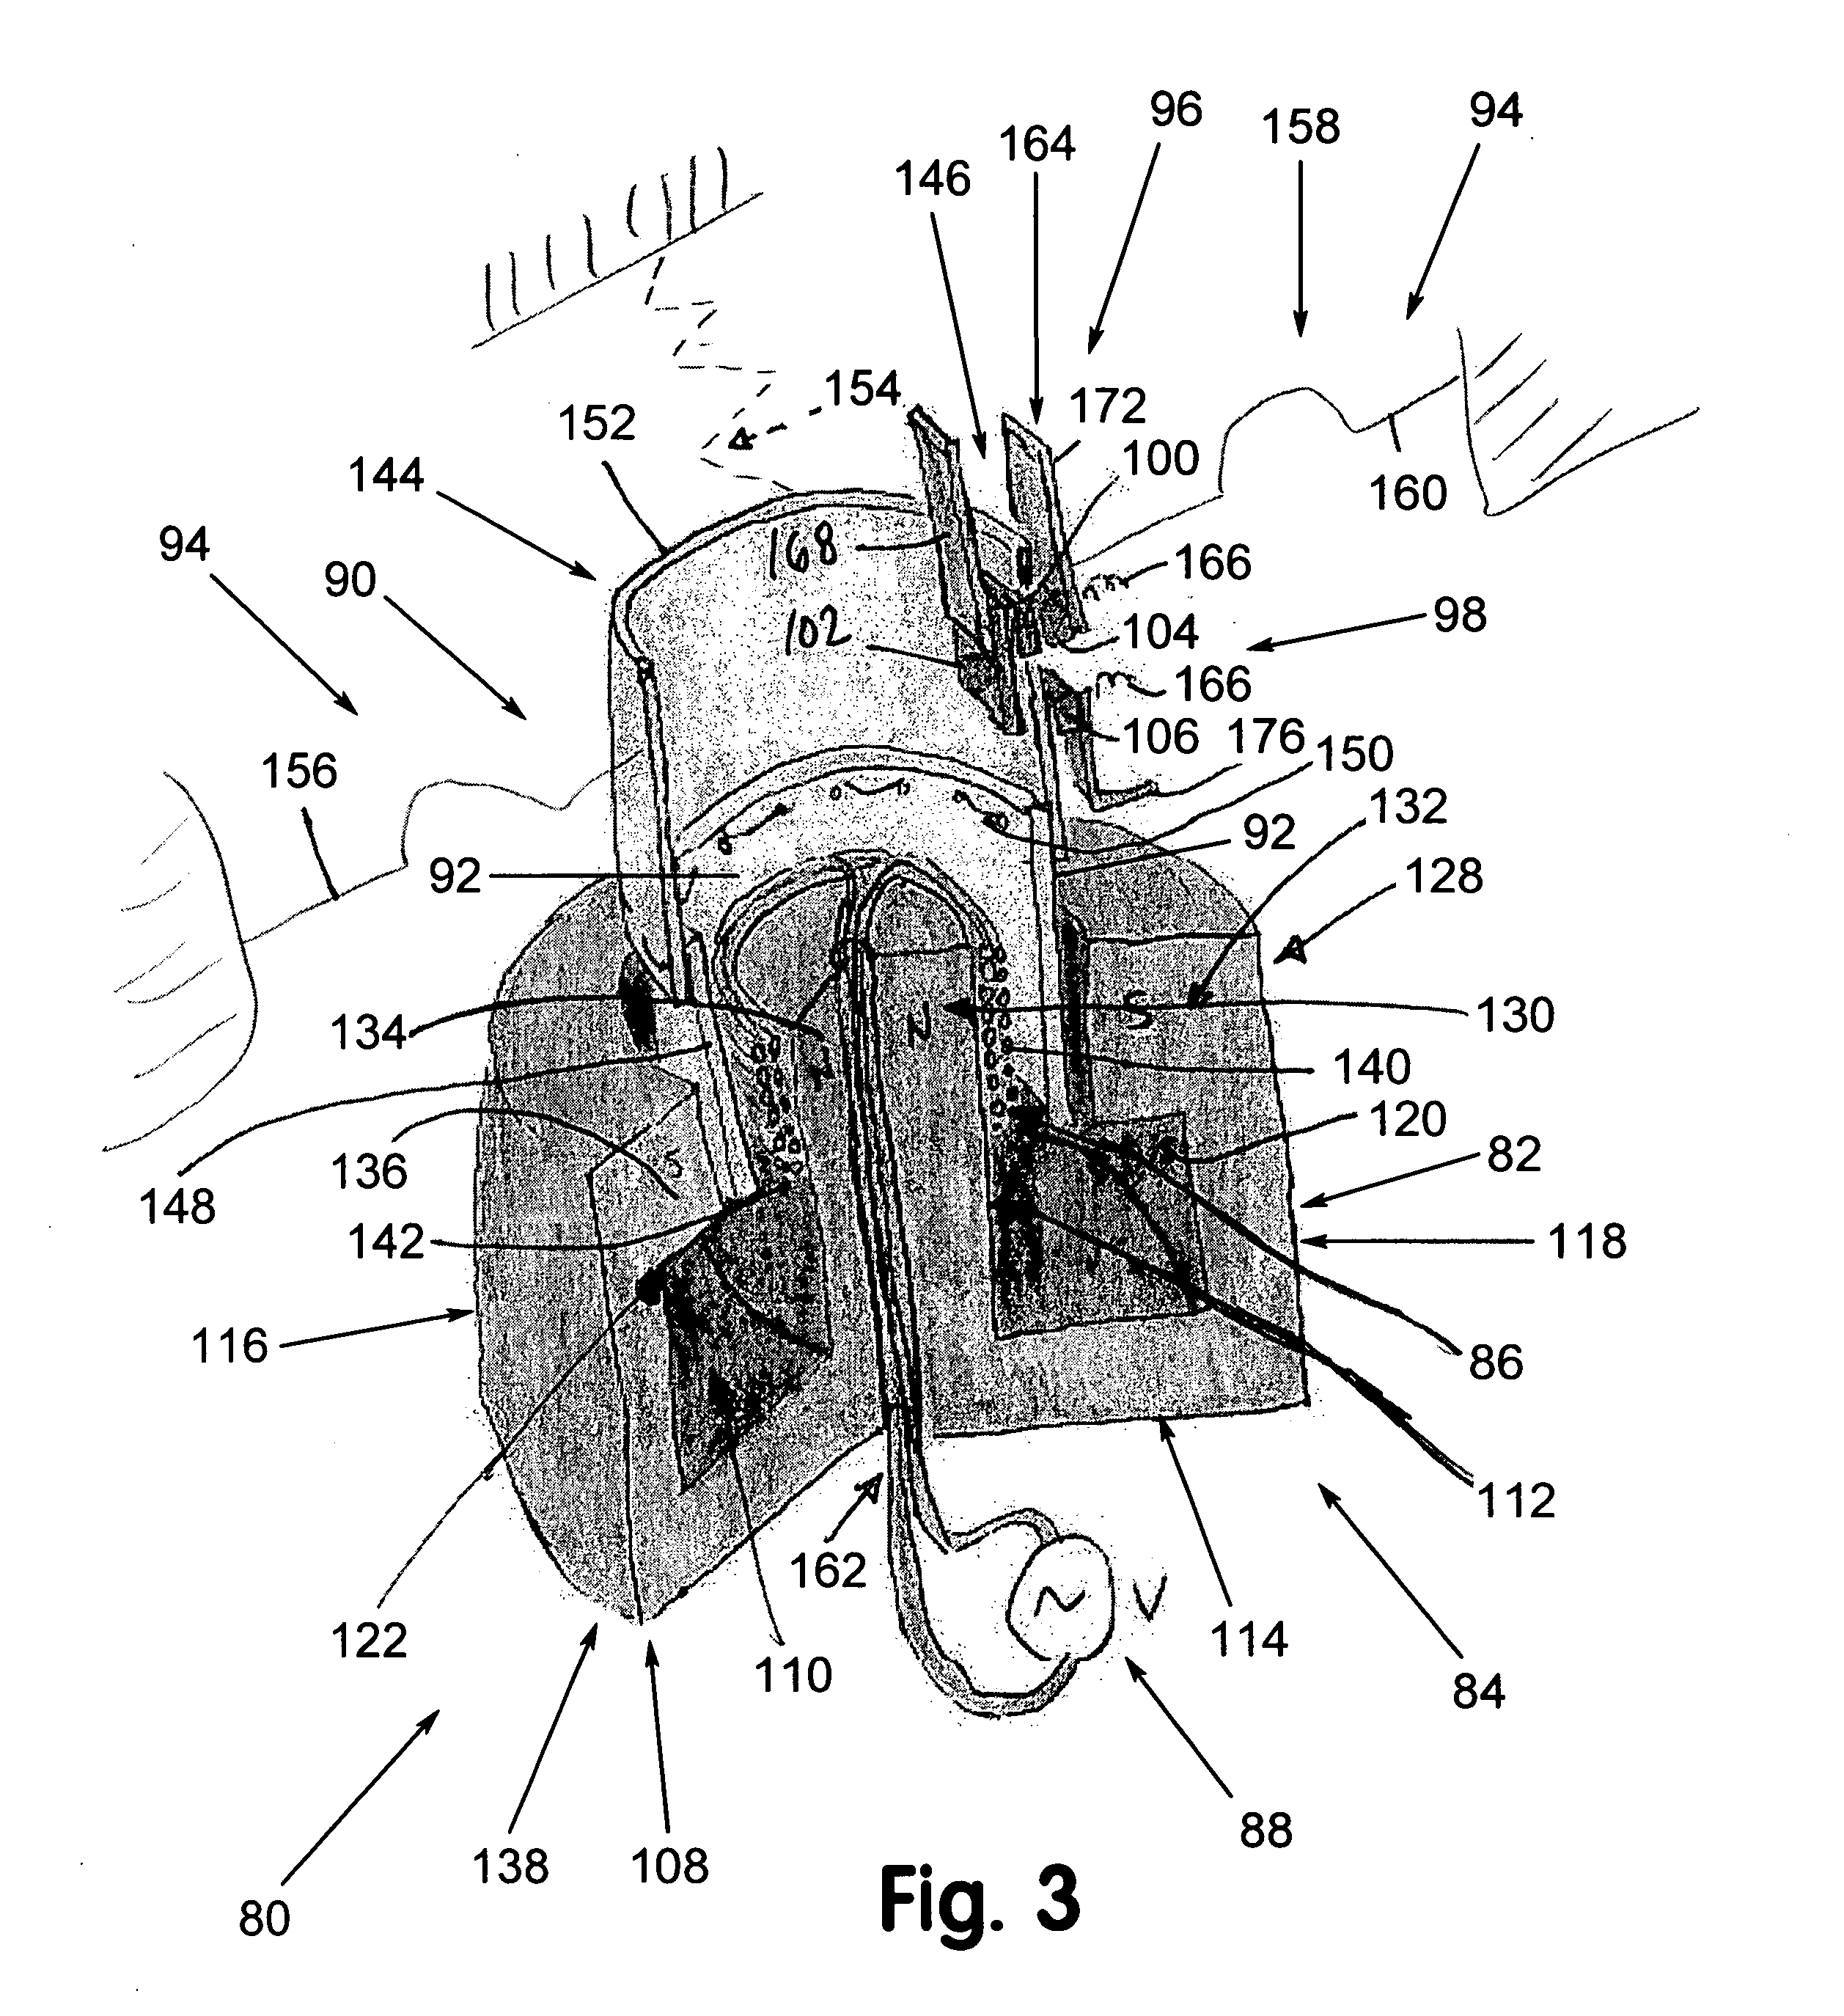 Eddy current inductive drive electromechanical linear actuator and switching arrangement